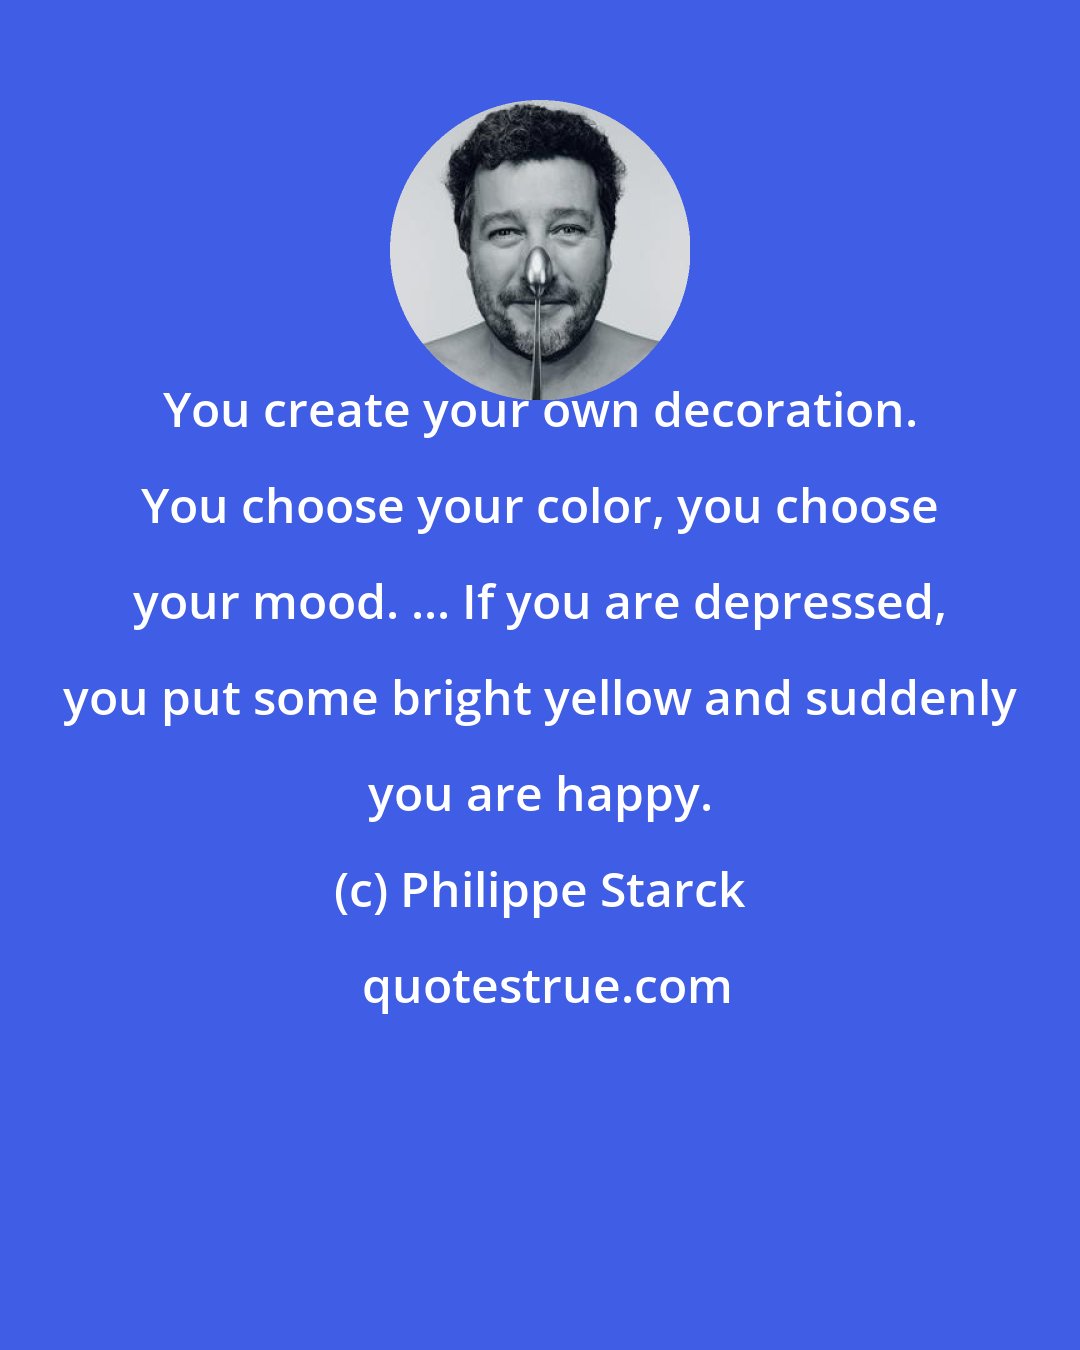 Philippe Starck: You create your own decoration. You choose your color, you choose your mood. ... If you are depressed, you put some bright yellow and suddenly you are happy.